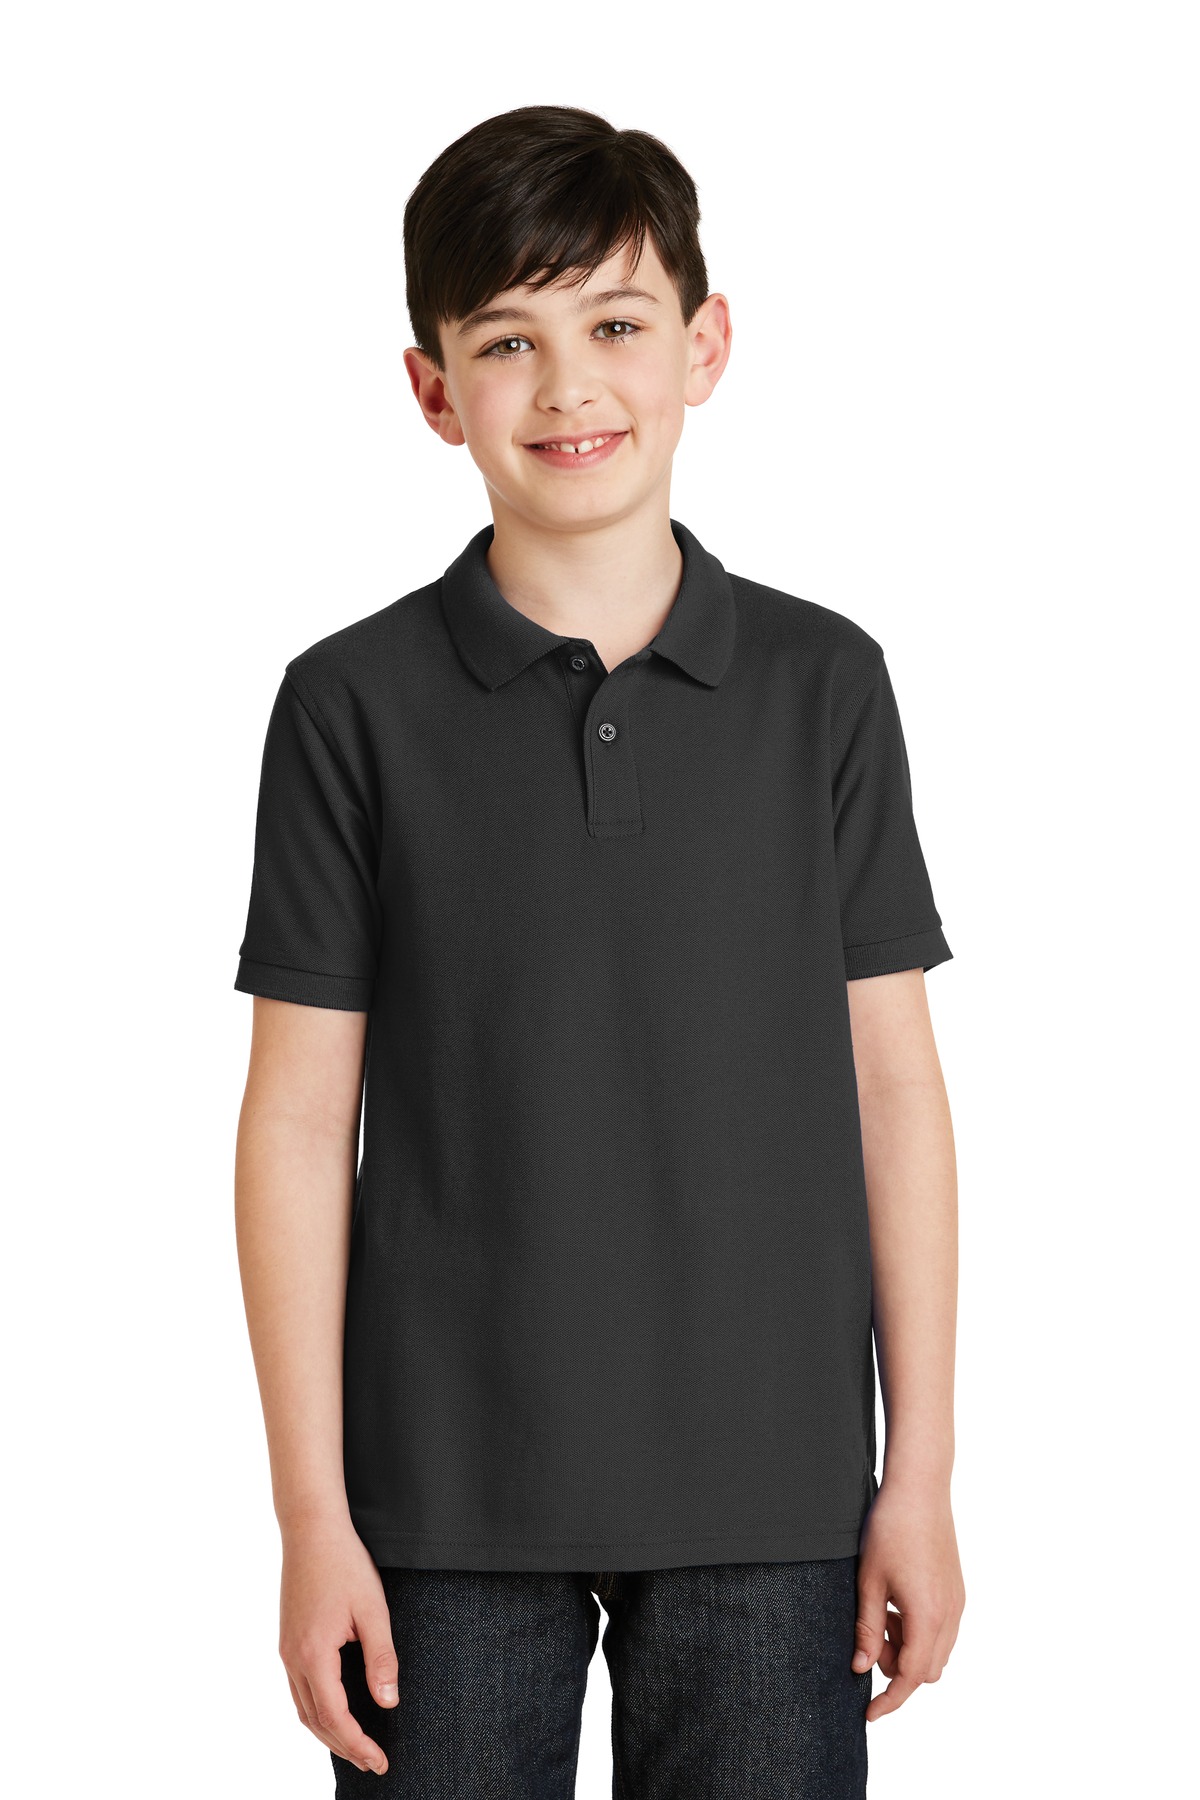 Port Authority Corporate Hospitality Youth Polos&Knits ® Youth Silk Touch Polo.-Port Authority